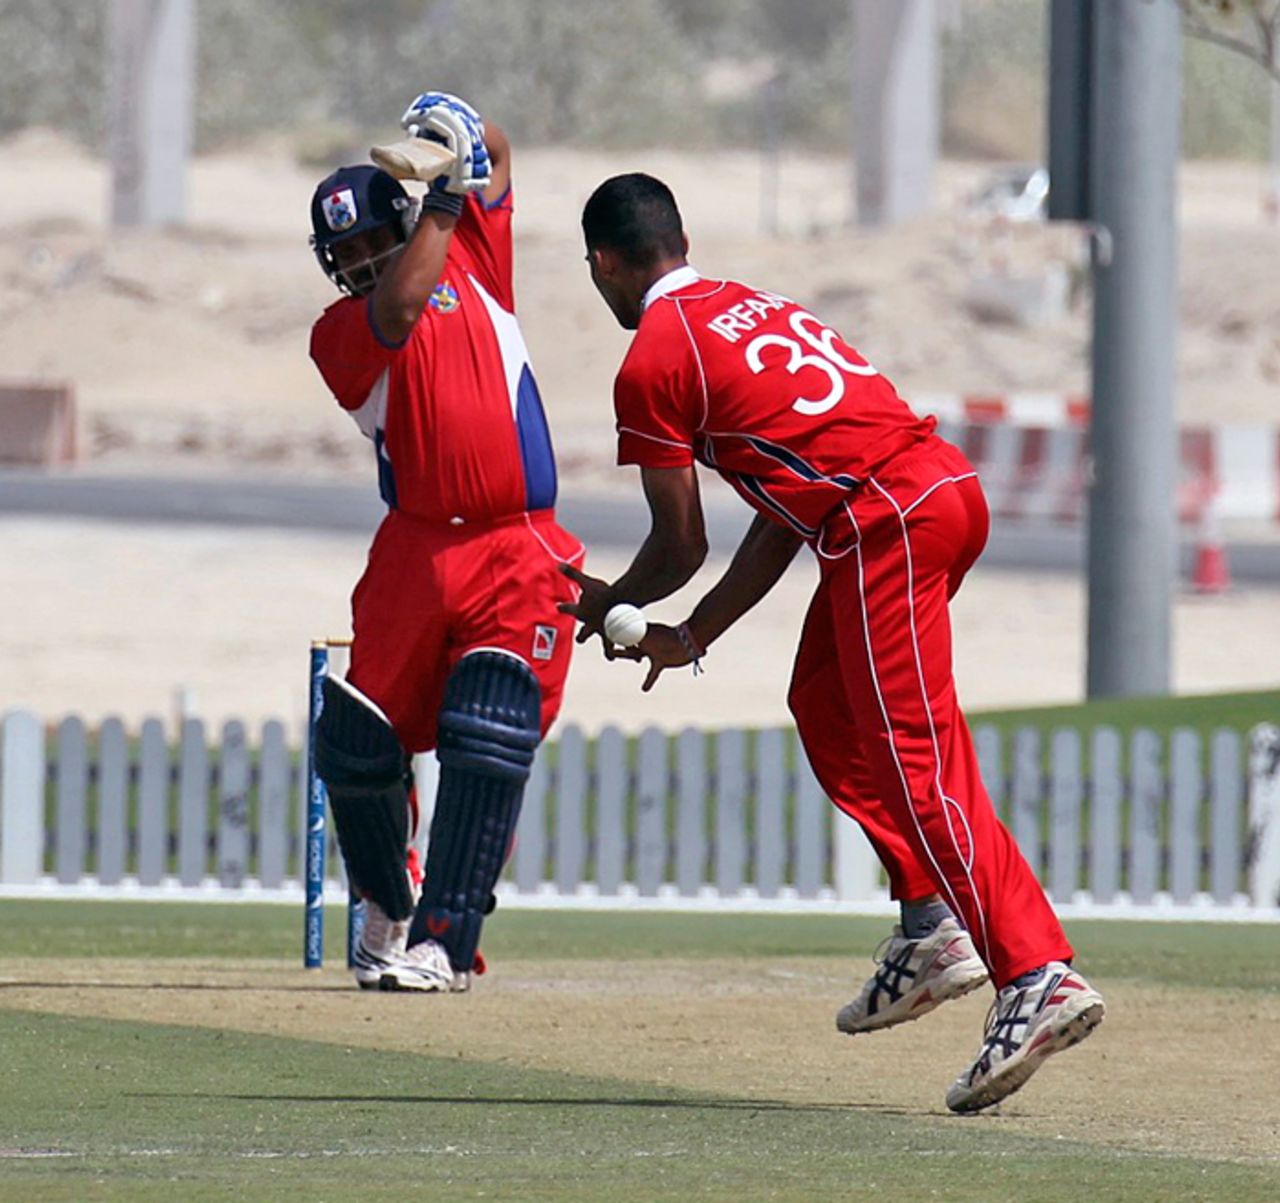 Bermuda's Jason Anderson is given an early life as Irfan Ahmed cannot not hold on to a return catch in the ICC WCL Division 2 match in Dubai on 9th April 2011